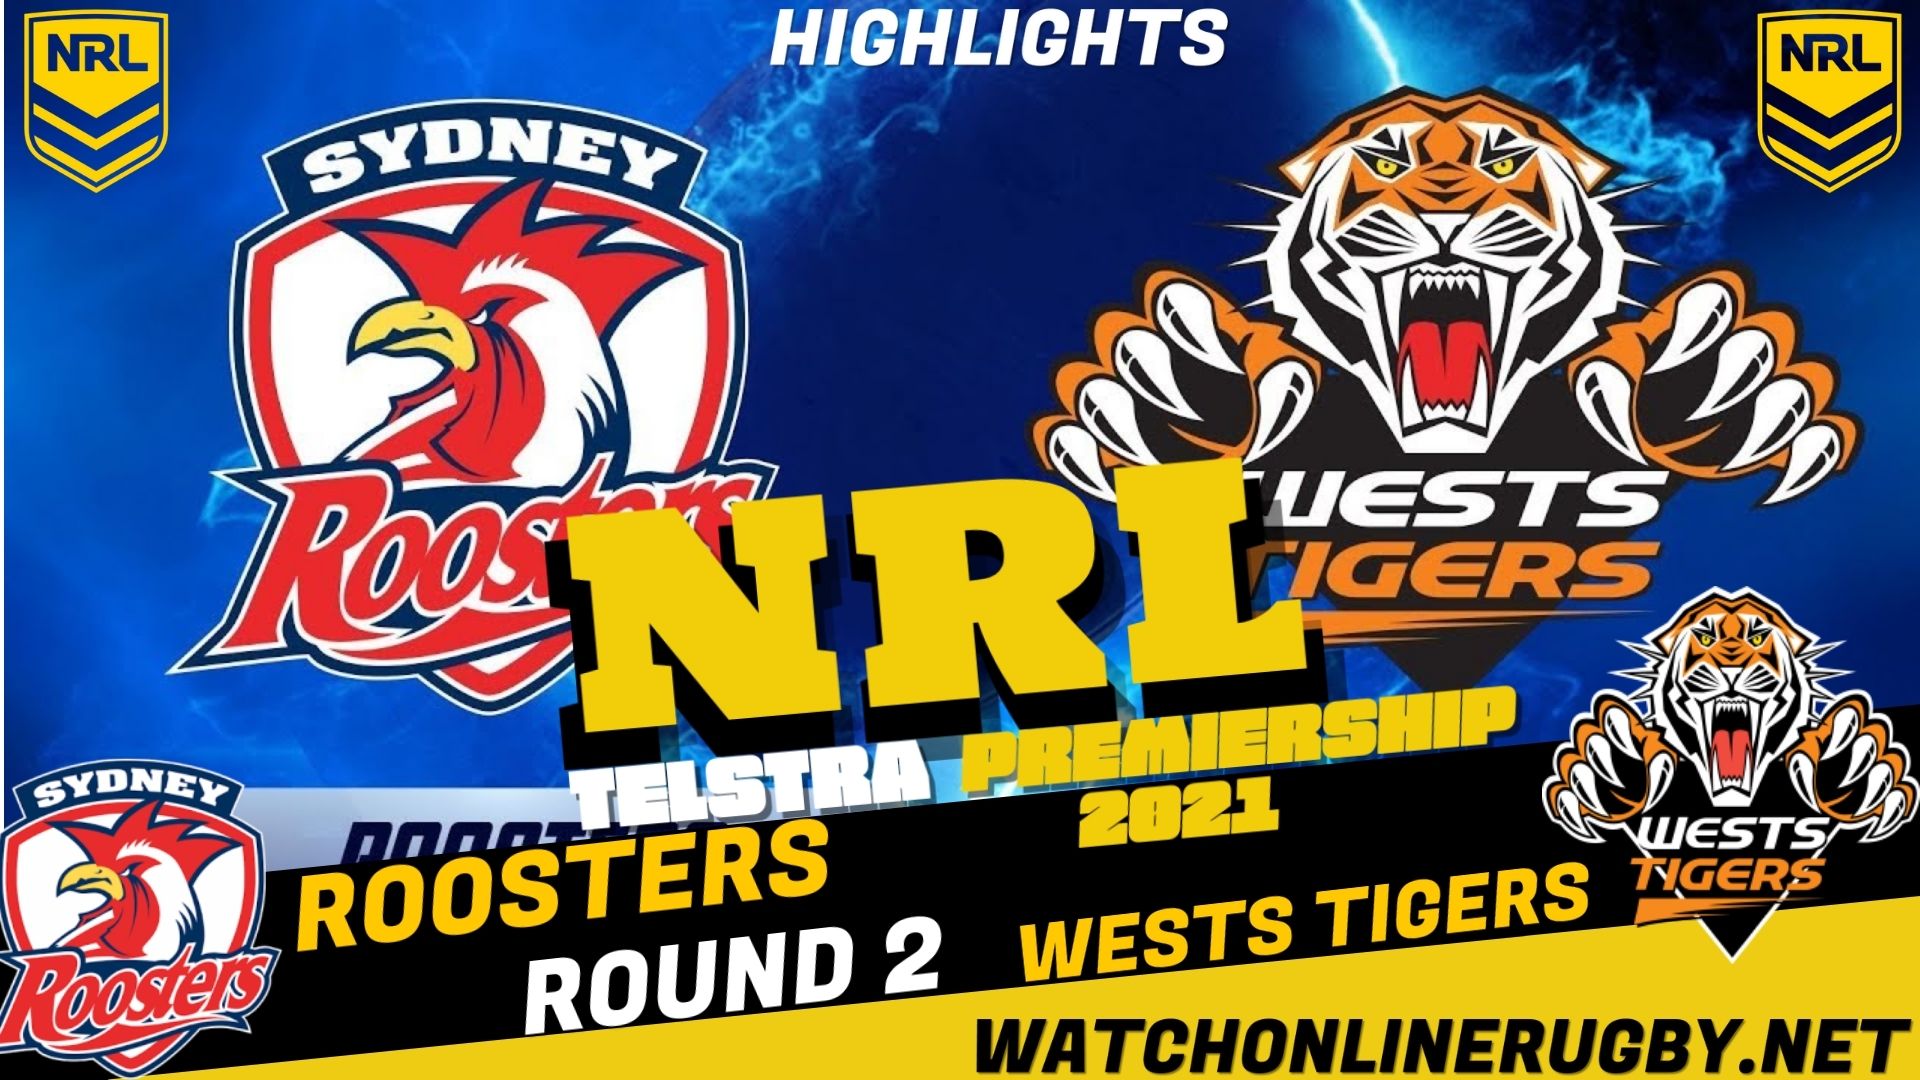 Wests Tigers Vs Roosters Highlights RD 2 NRL Rugby